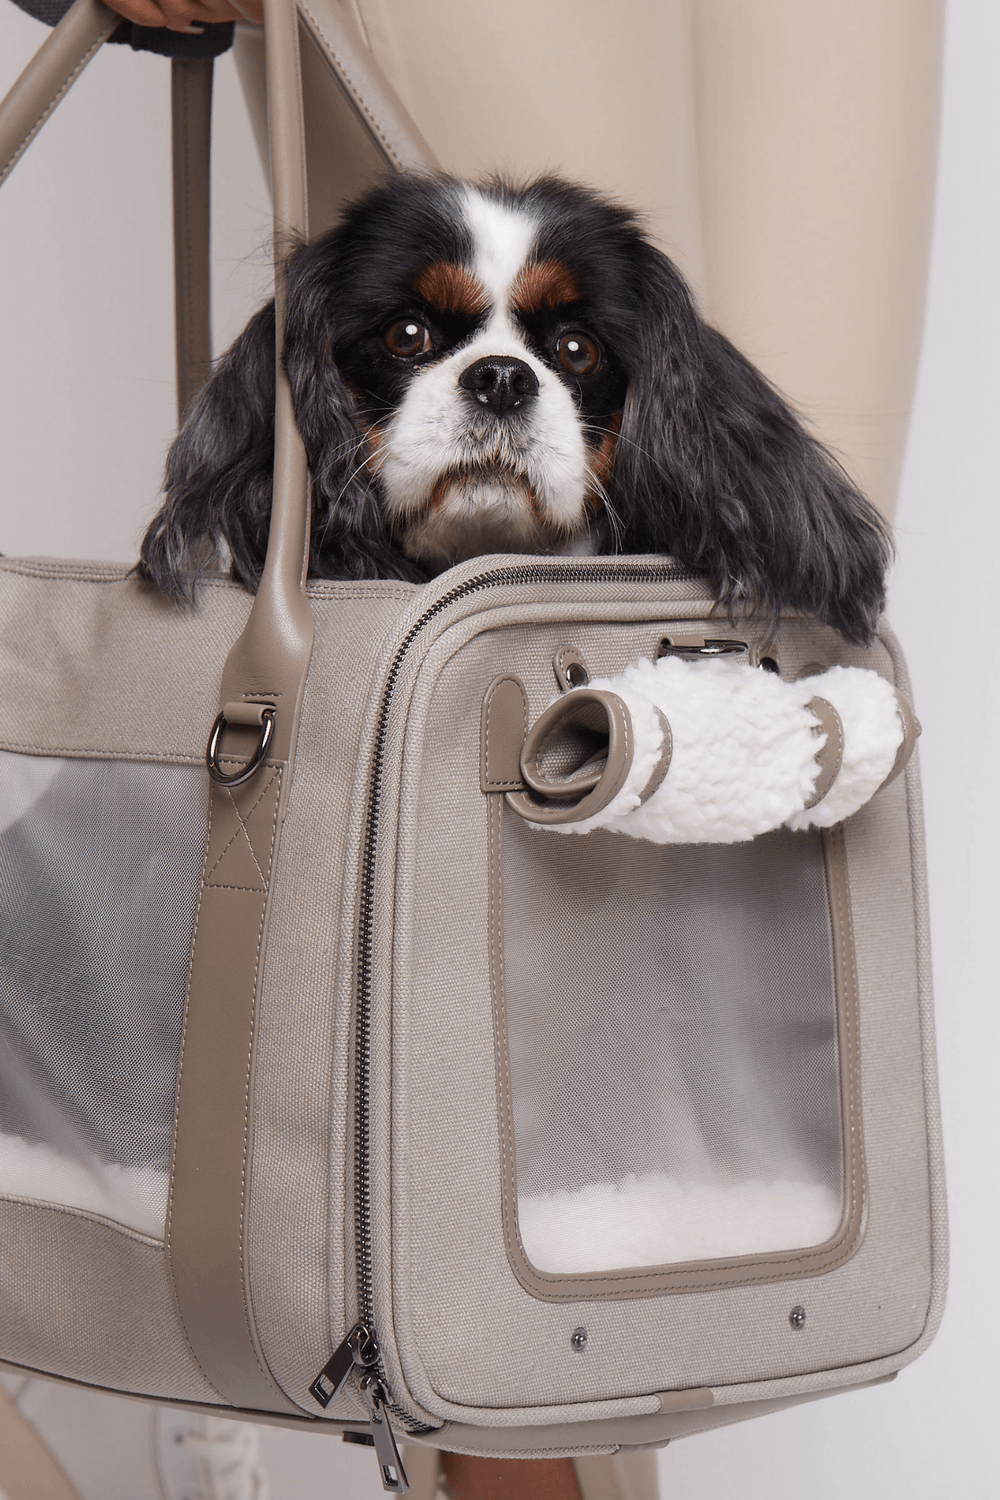 Chewy Vuitton Bag - Dog Toy - 2 Sizes